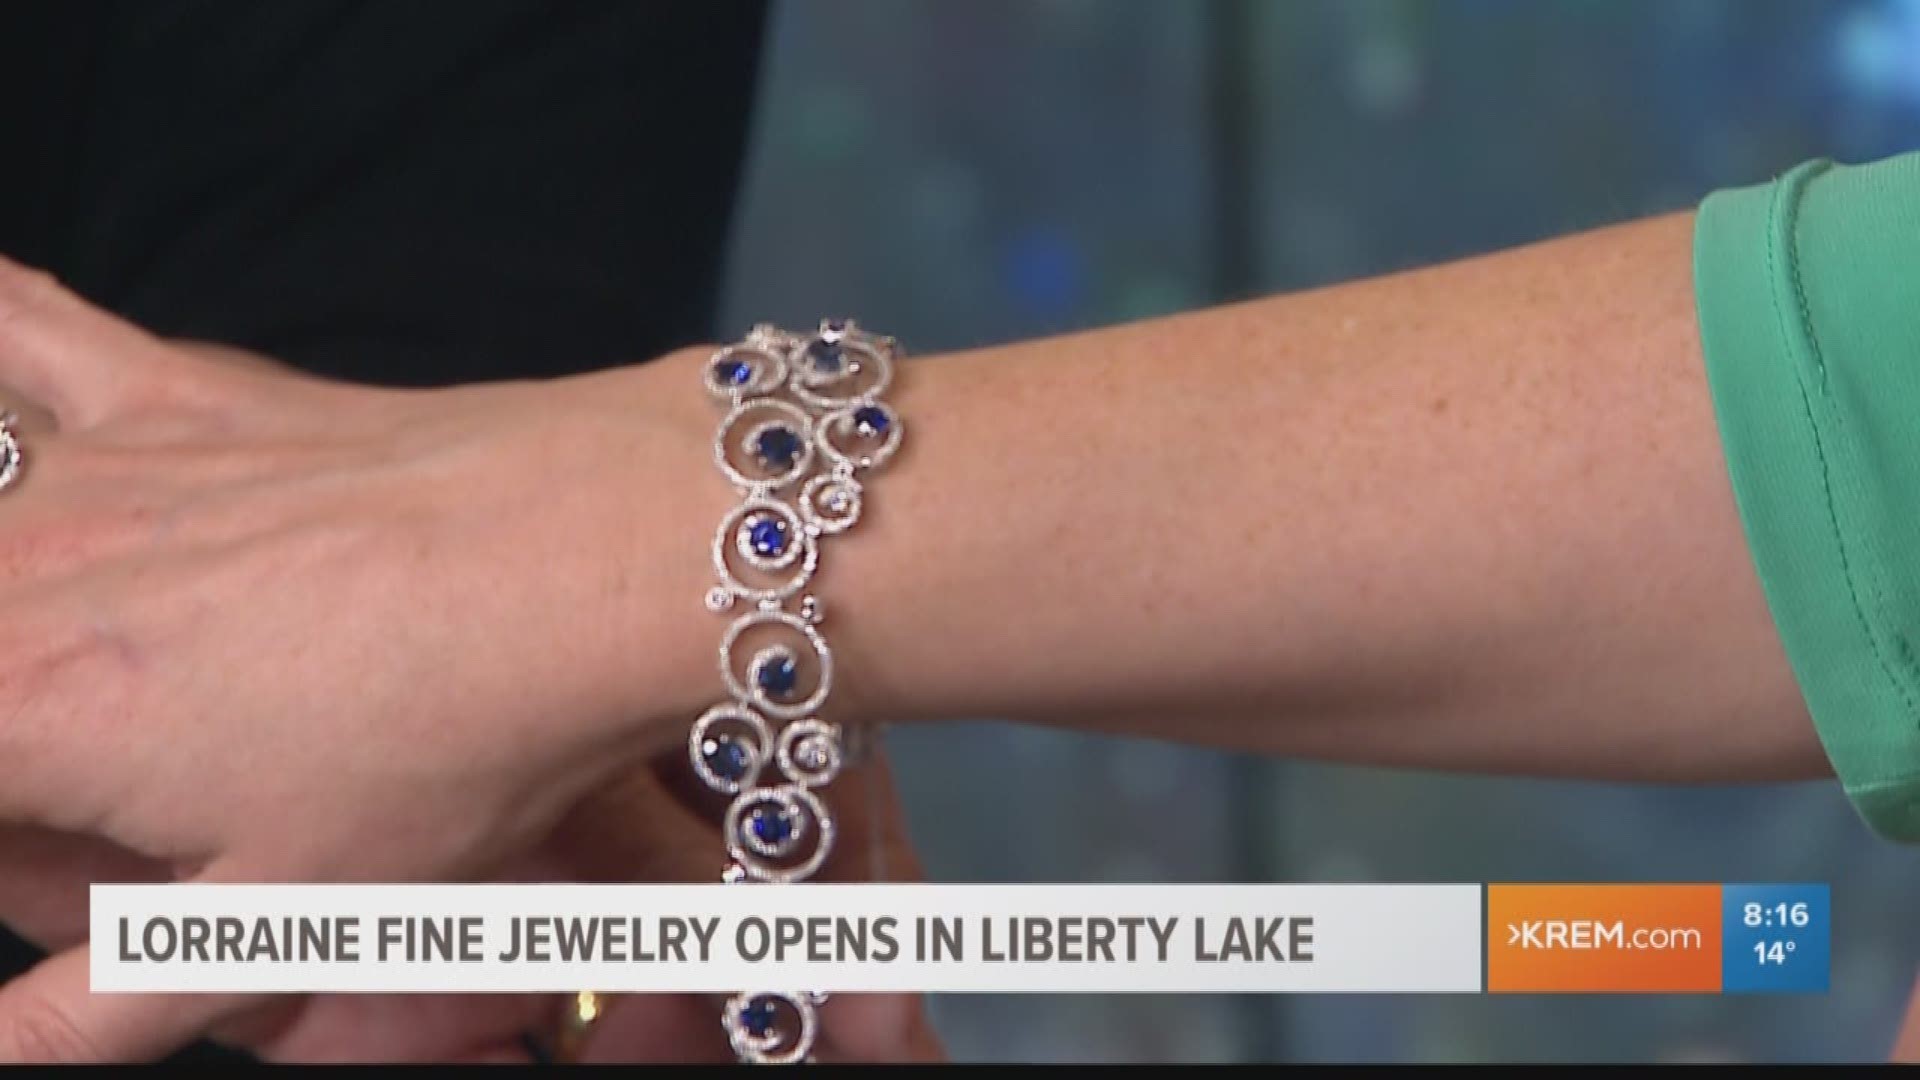 Lorraine Fine Jewelry opens new store front in Liberty Lake